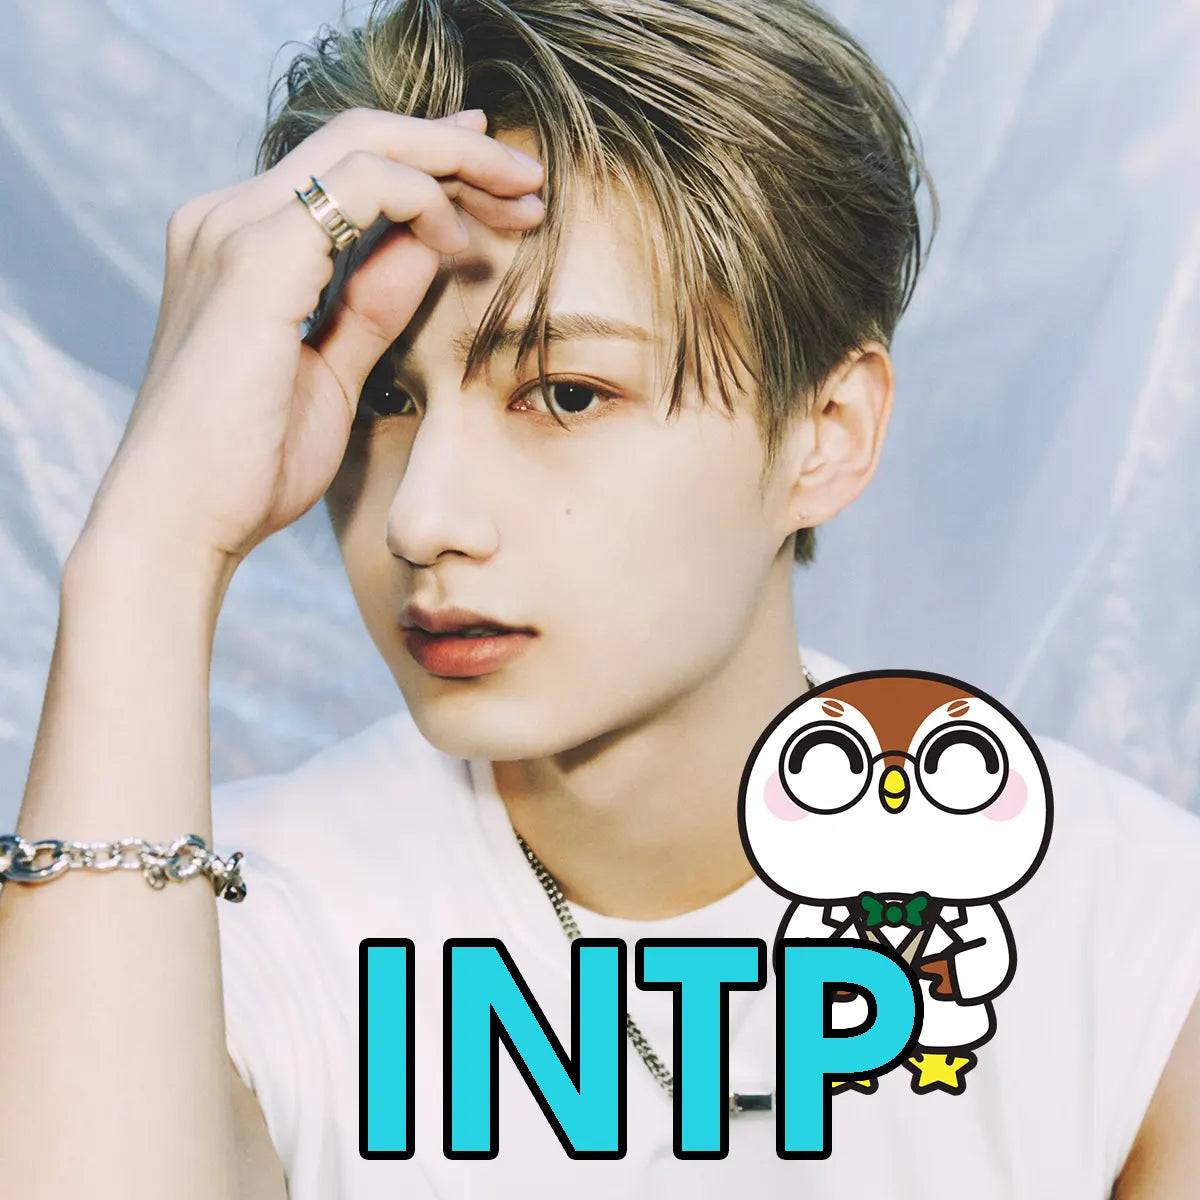 Jun SEVENTEEN MBTI Personality Test INFP INTP Personality Type